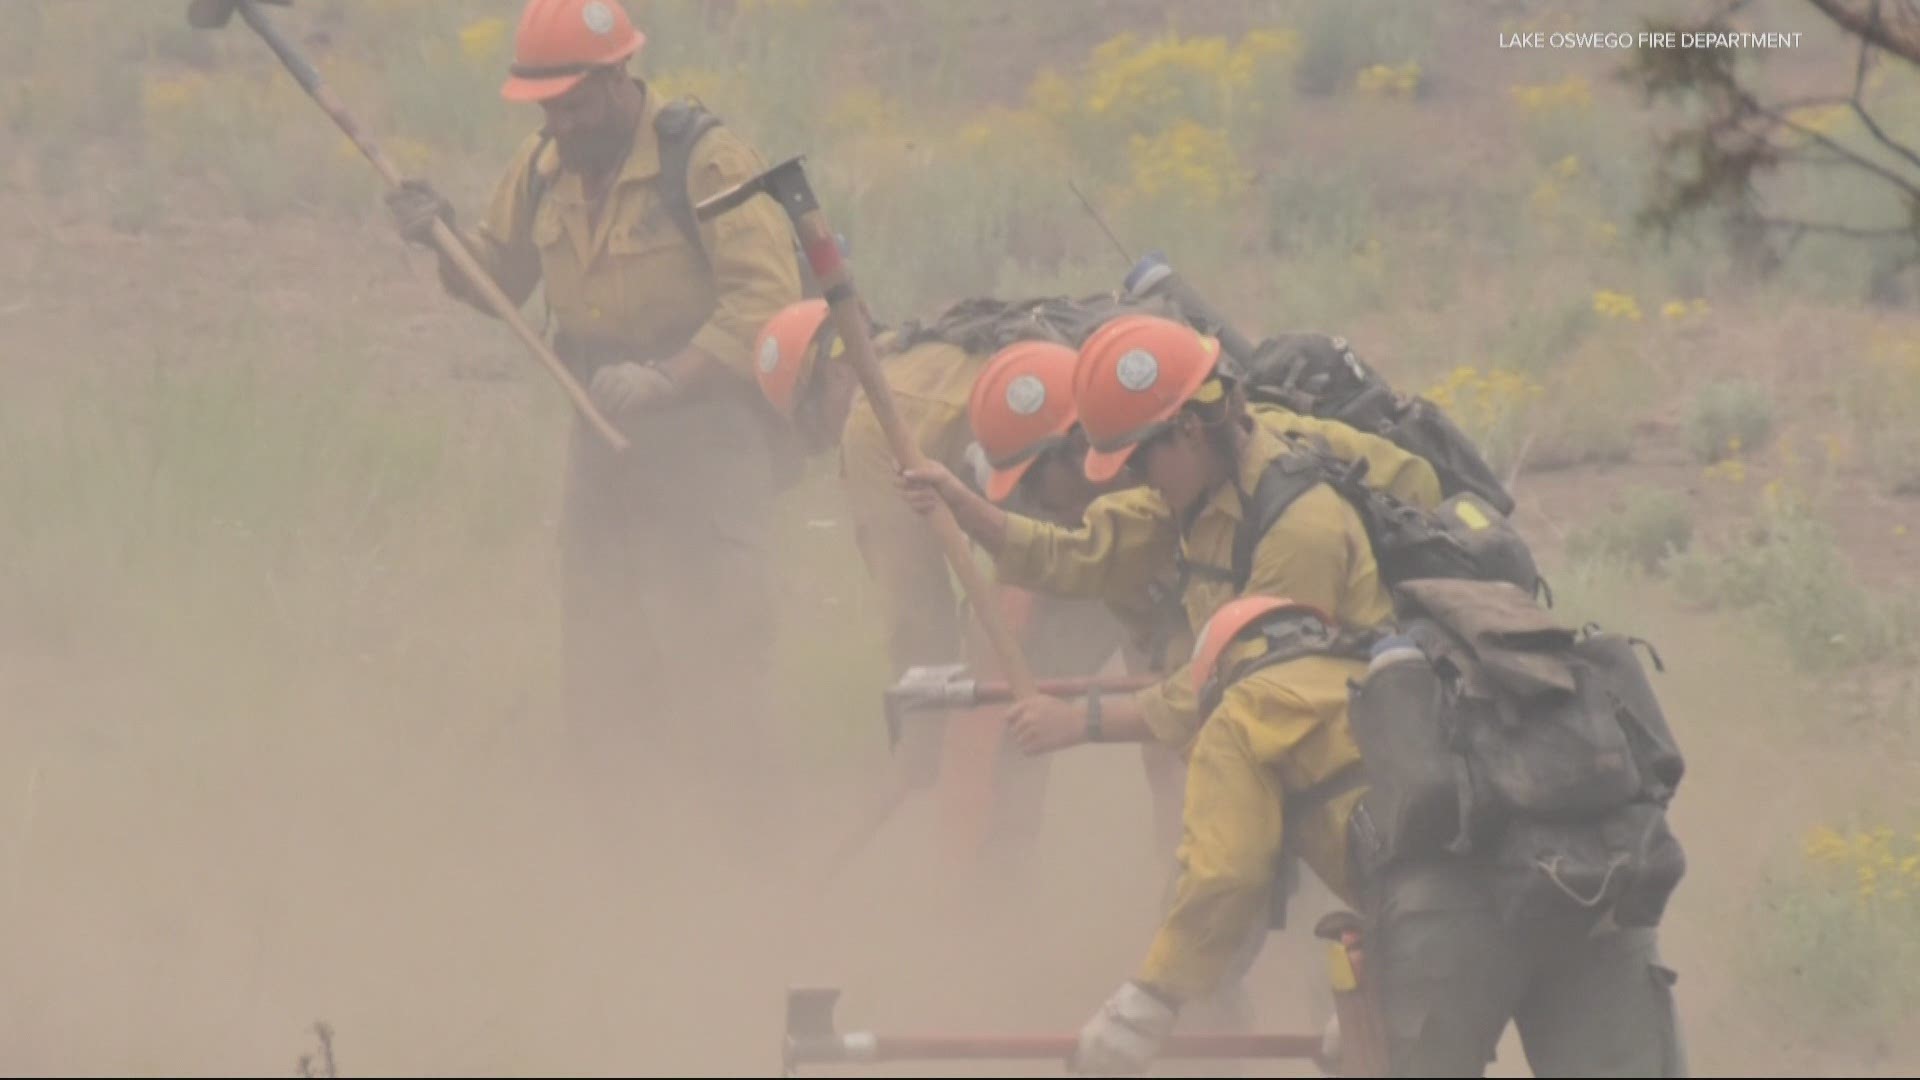 The Bootleg Fire is the largest wildfire in the nation. As Maggie Vespa reports, firefighters from across the country are being deployed to southern Oregon.